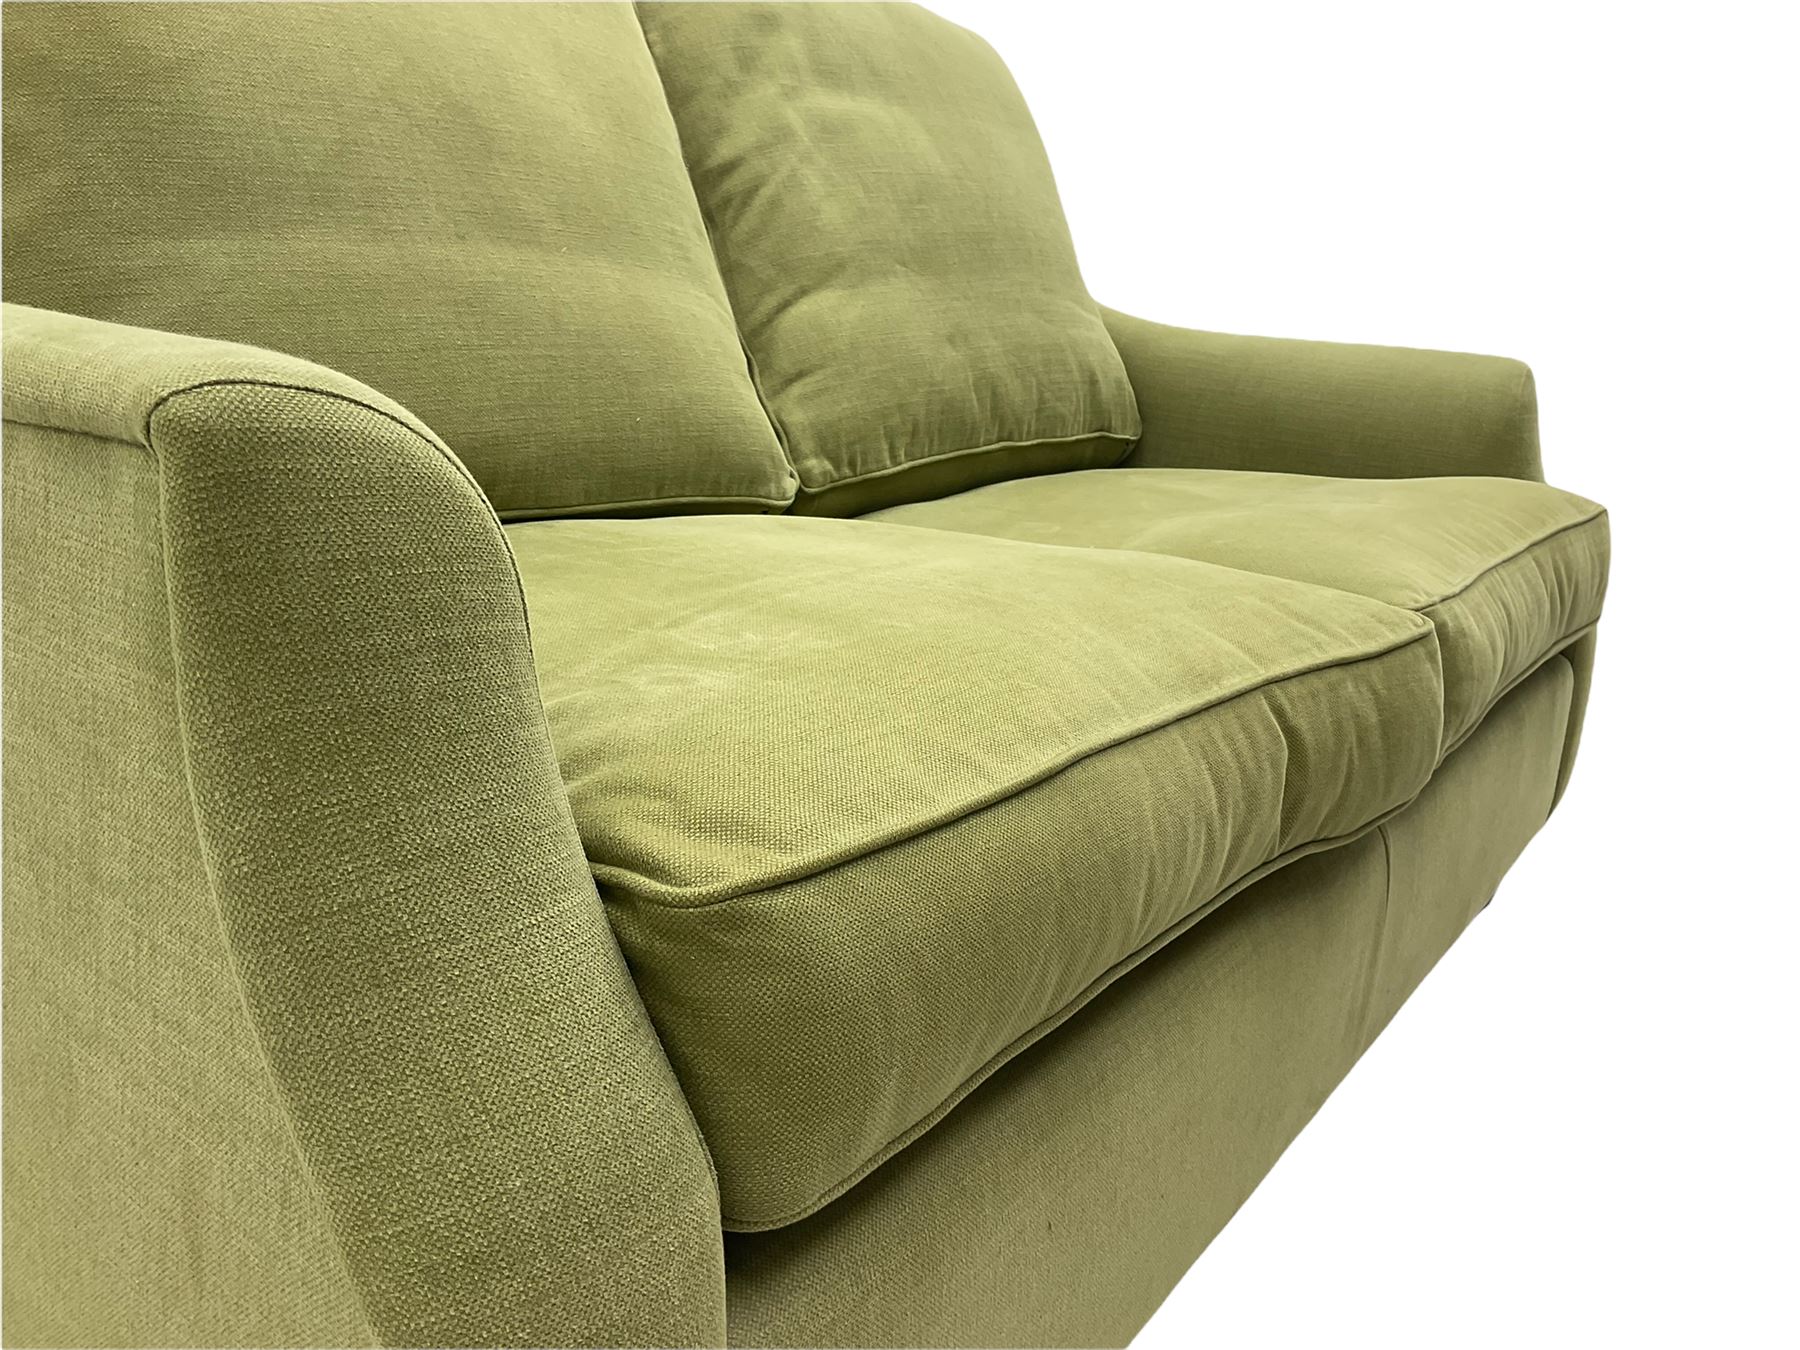 Wesley-Barrell two seat sofa and pair of matching armchairs - Image 7 of 20